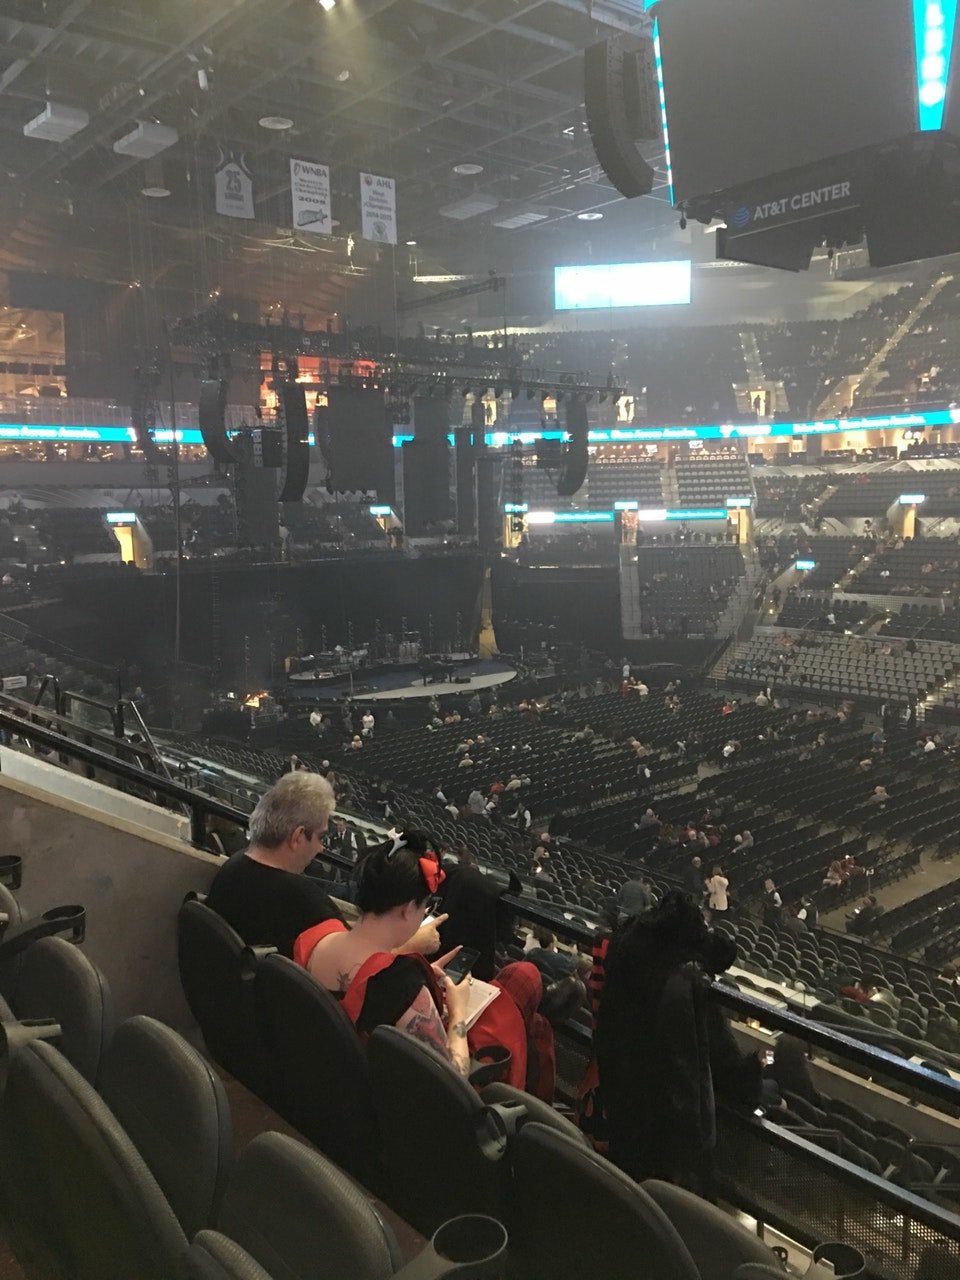 section 207, row 6 seat view  for concert - at&t center